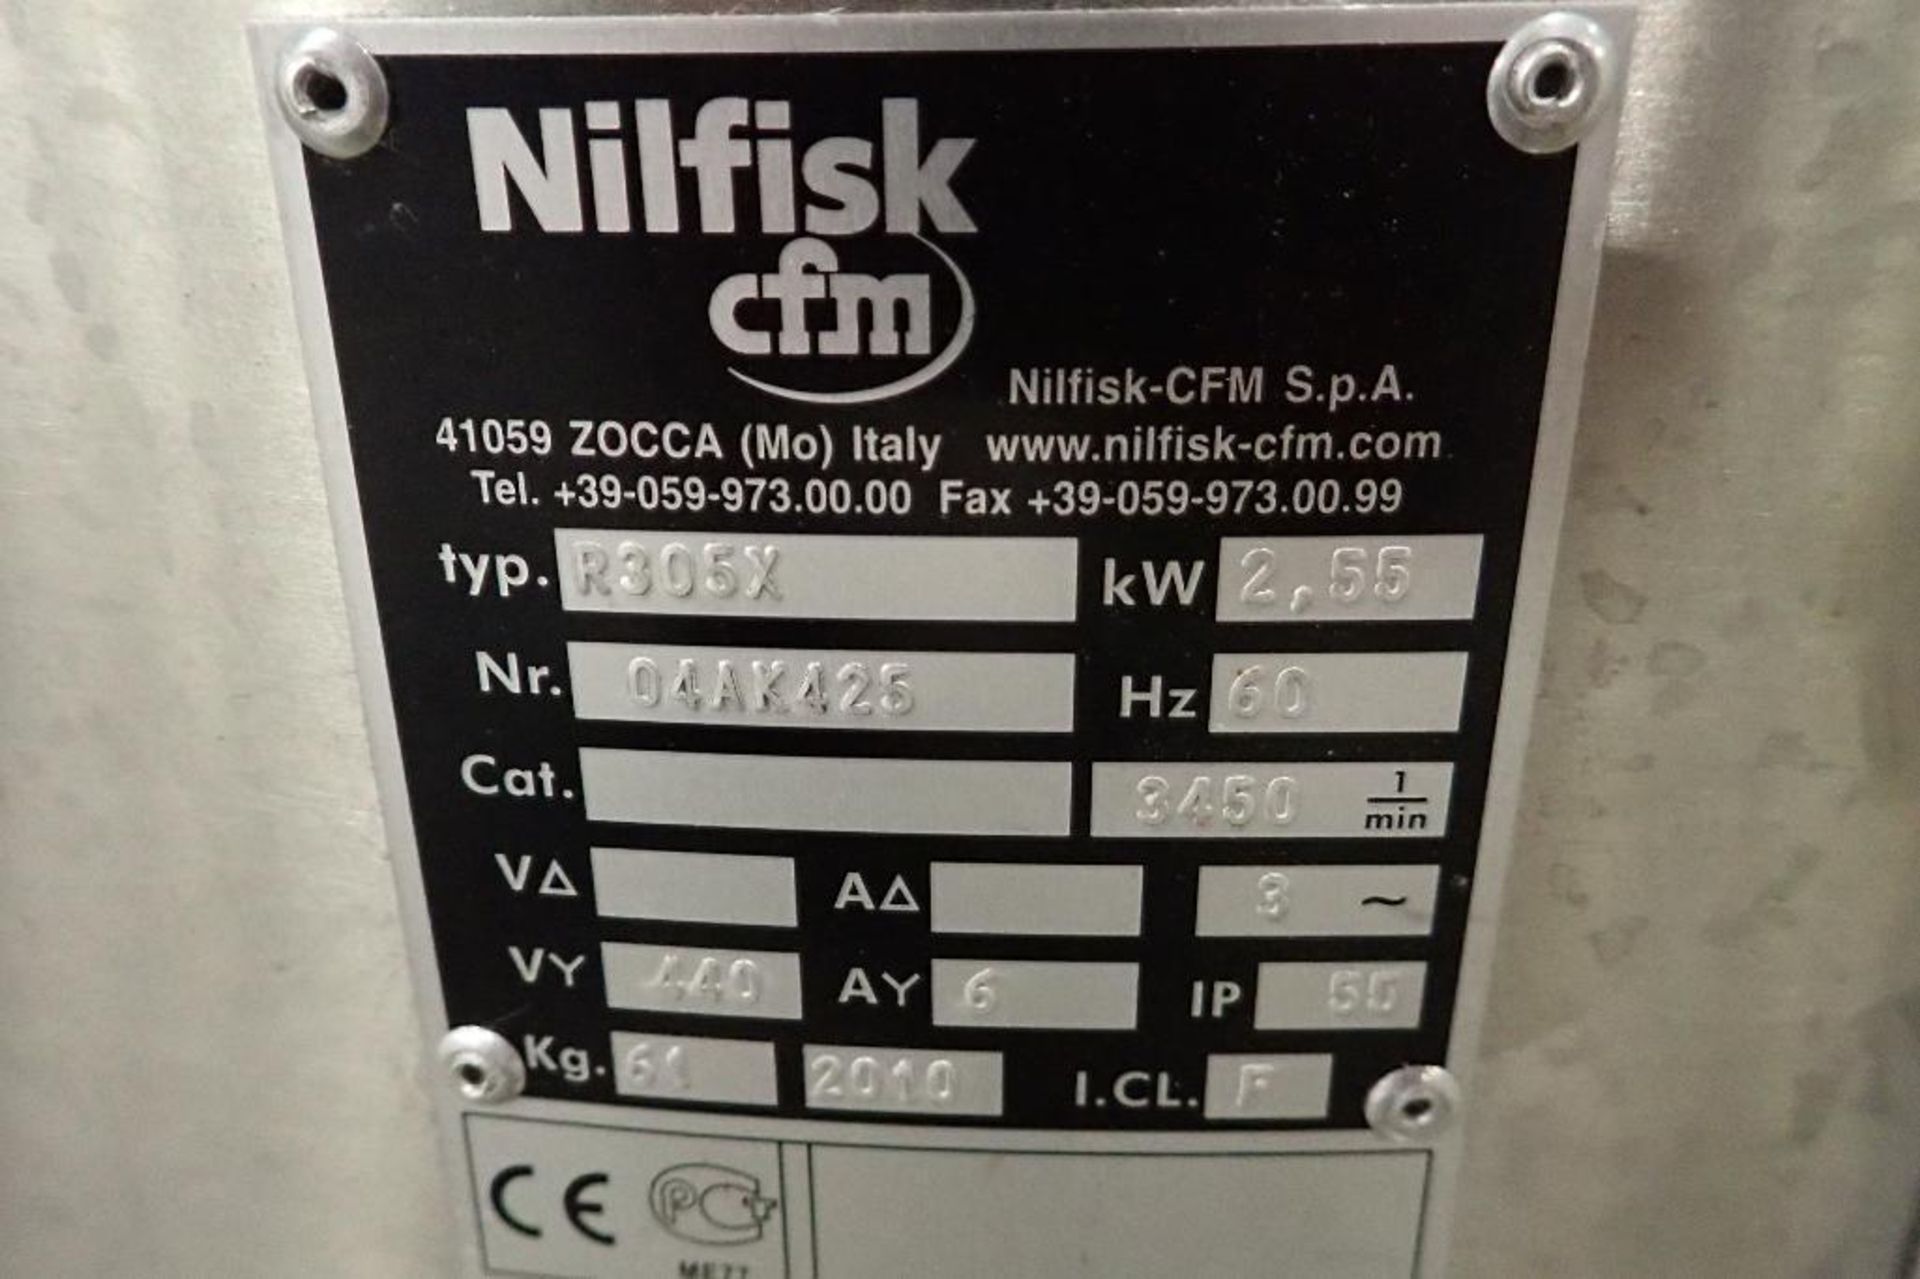 Nilfisk commercial vacuum, Type R305X, SN 04AK425. **Rigging Fee: $25** (Located in 3703 - Eagan, MN - Image 3 of 3